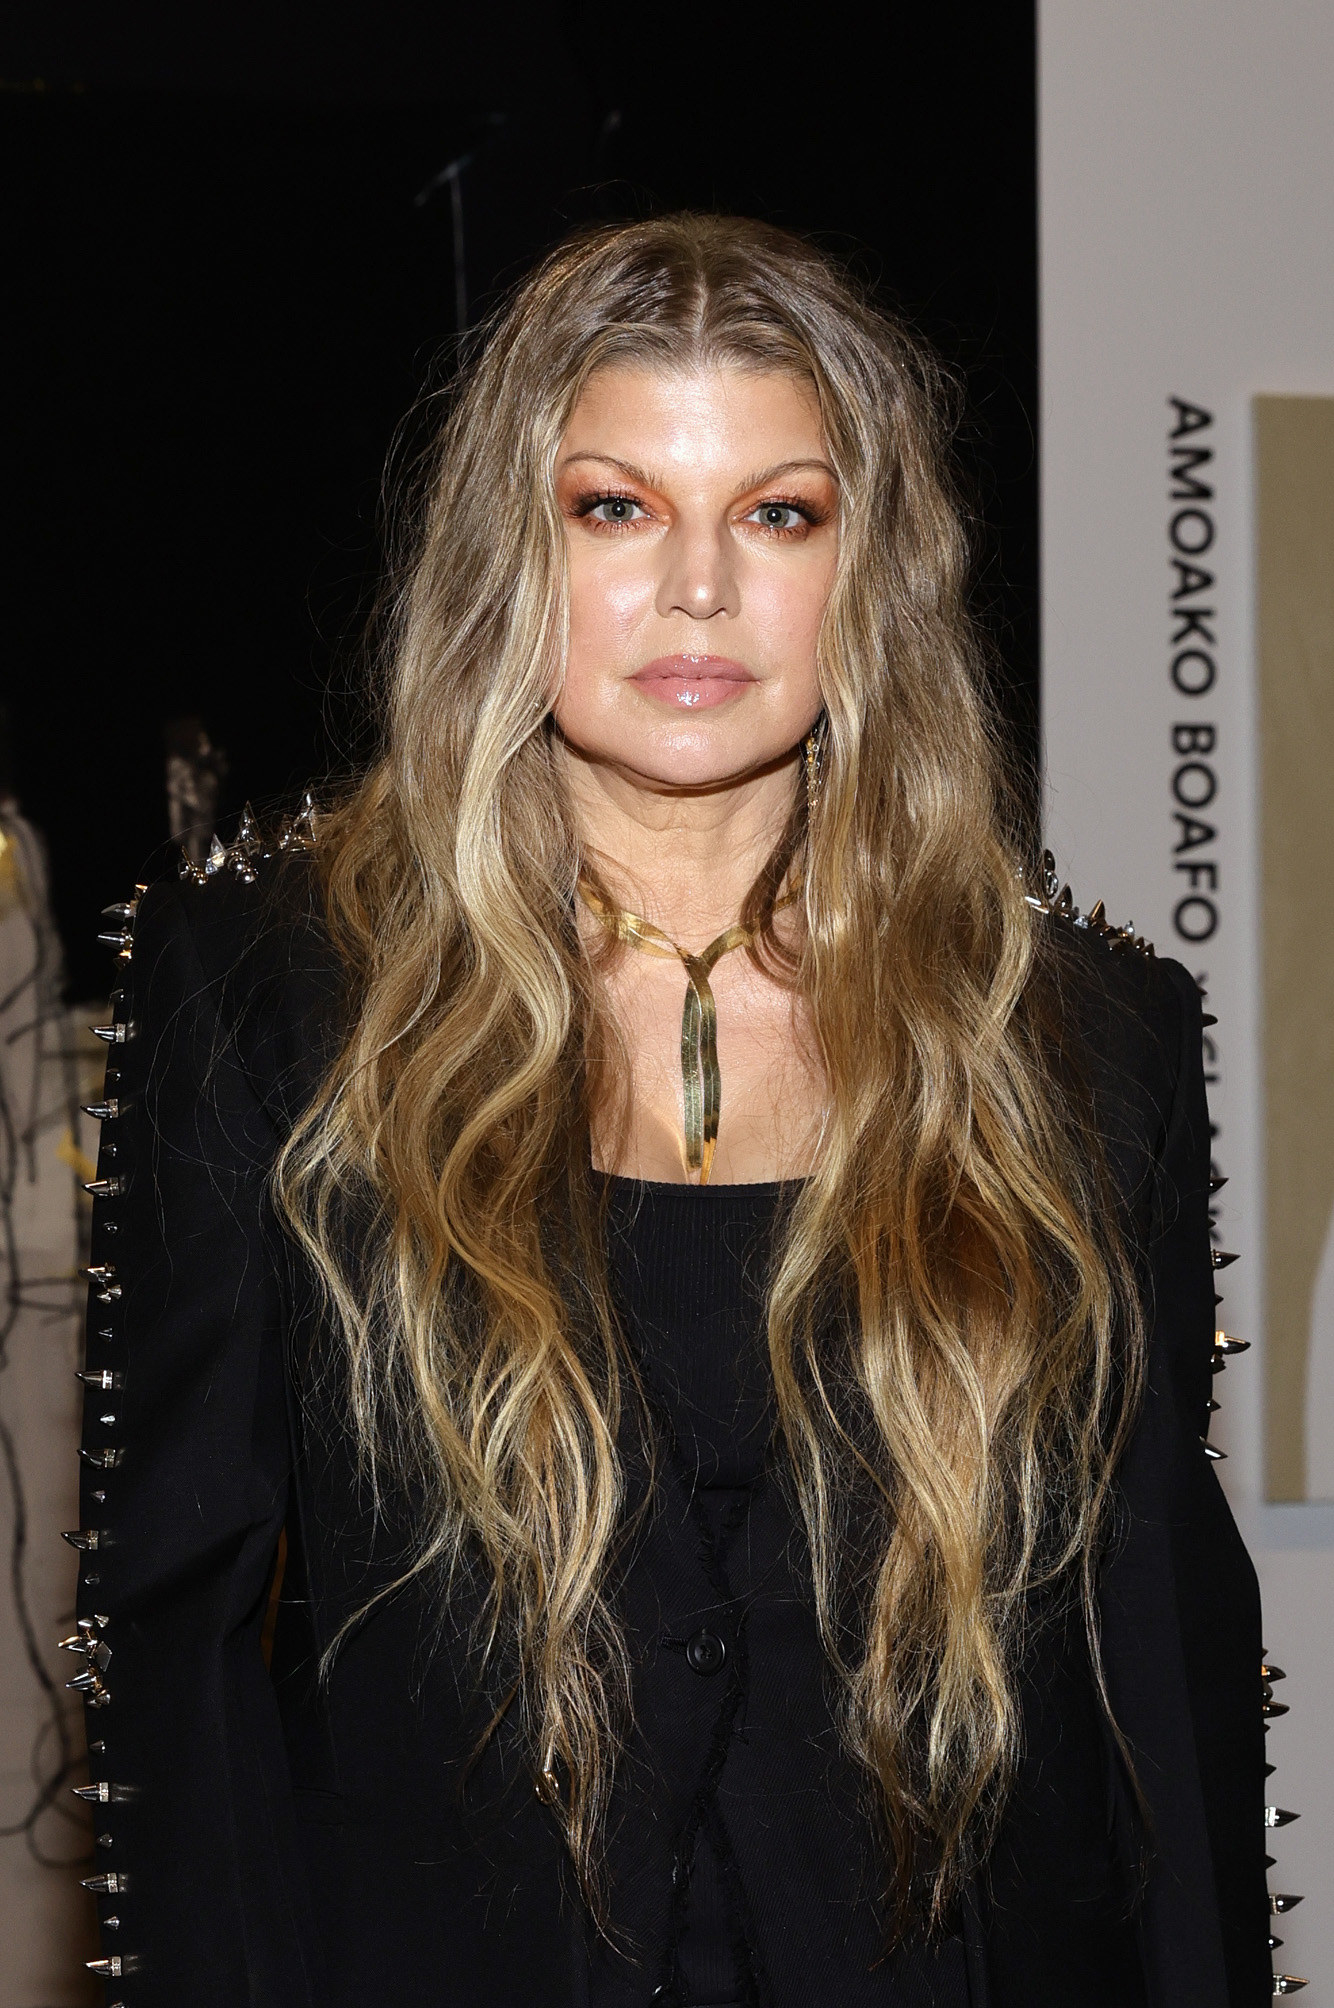 Fergie is photographed at the Artists Inspired by Music: Interscope Reimagined Art Exhibit gathering on January 26, 2022